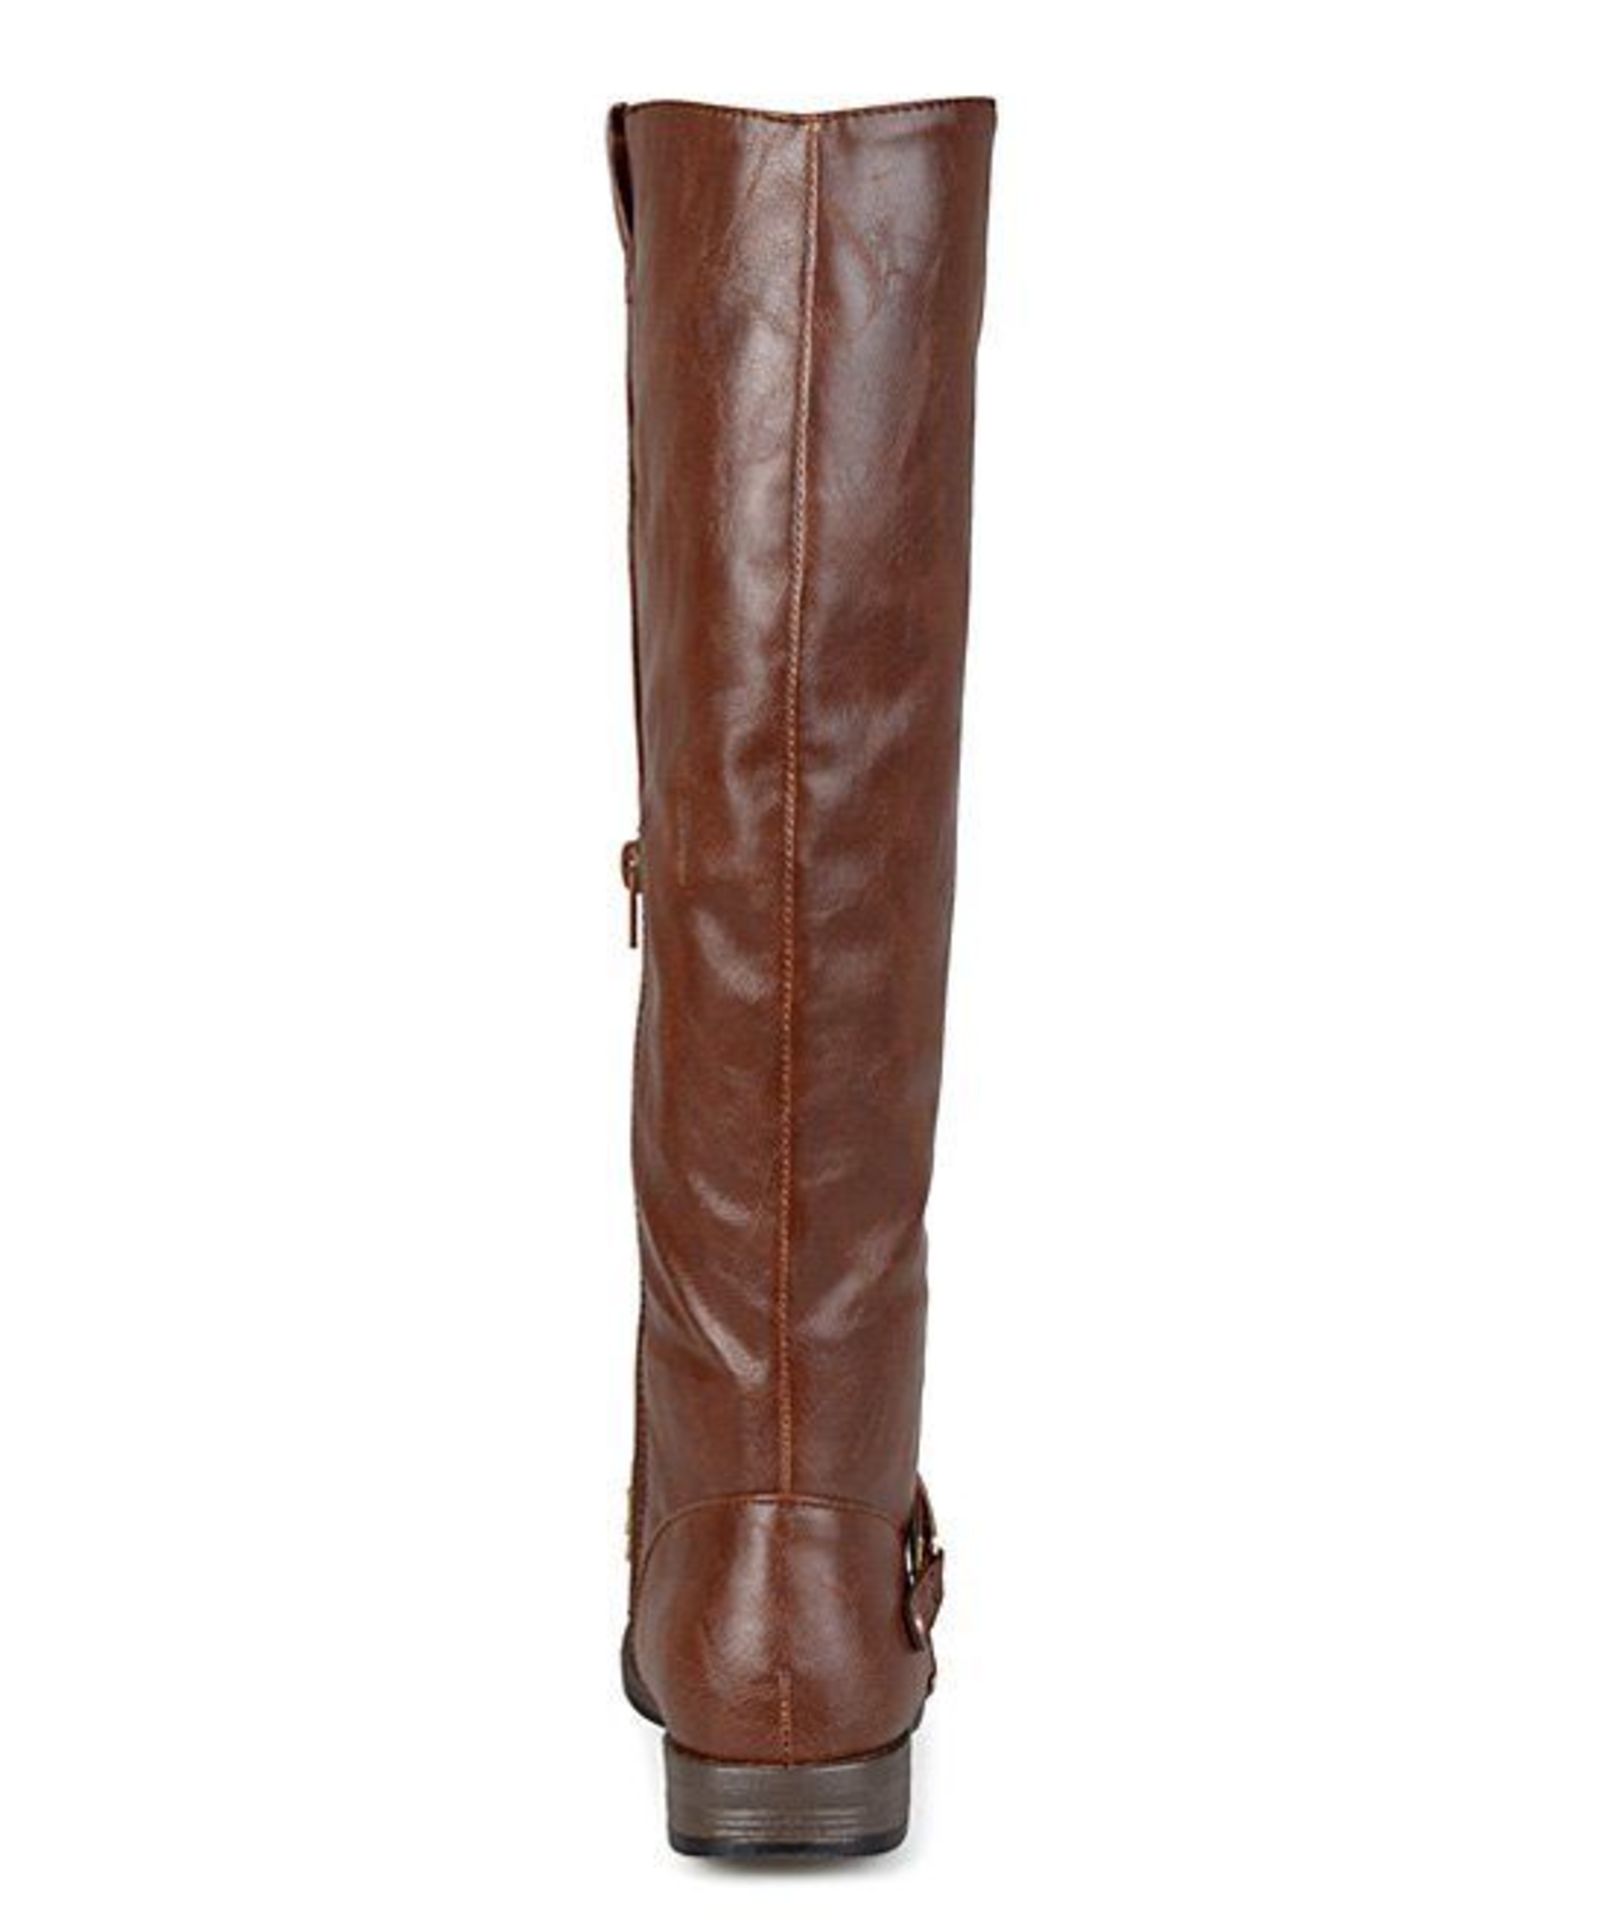 Journee Collection Brown Kai Boot (Uk Size 4.5:Us Size 7) (New with box) [Ref: 14251359-C-002] - Image 4 of 5